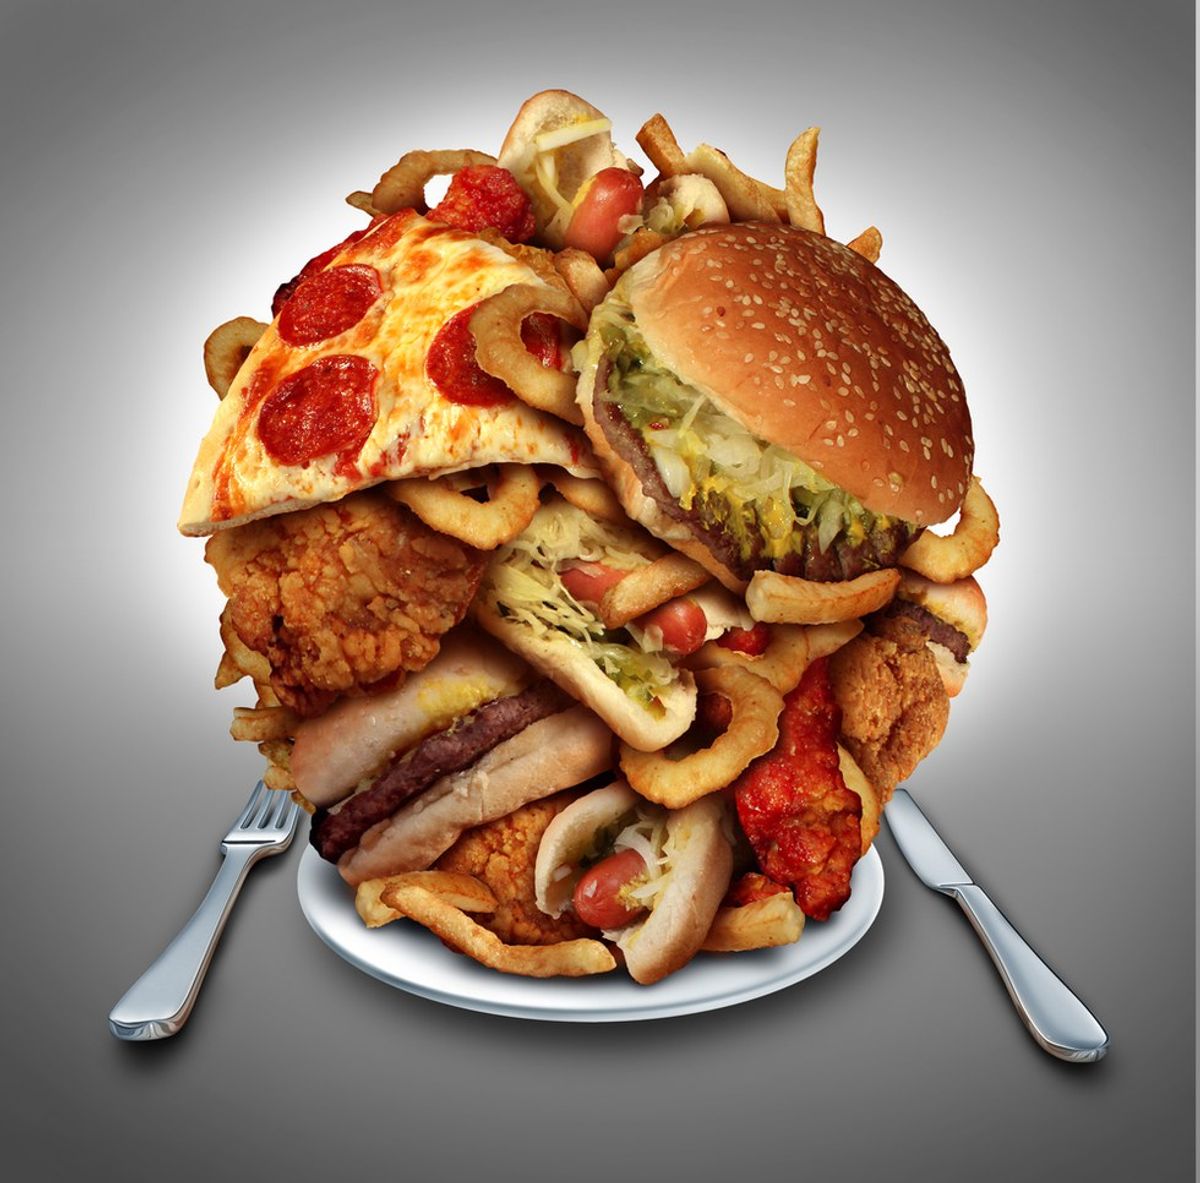 8 Ways To Stop Overeating